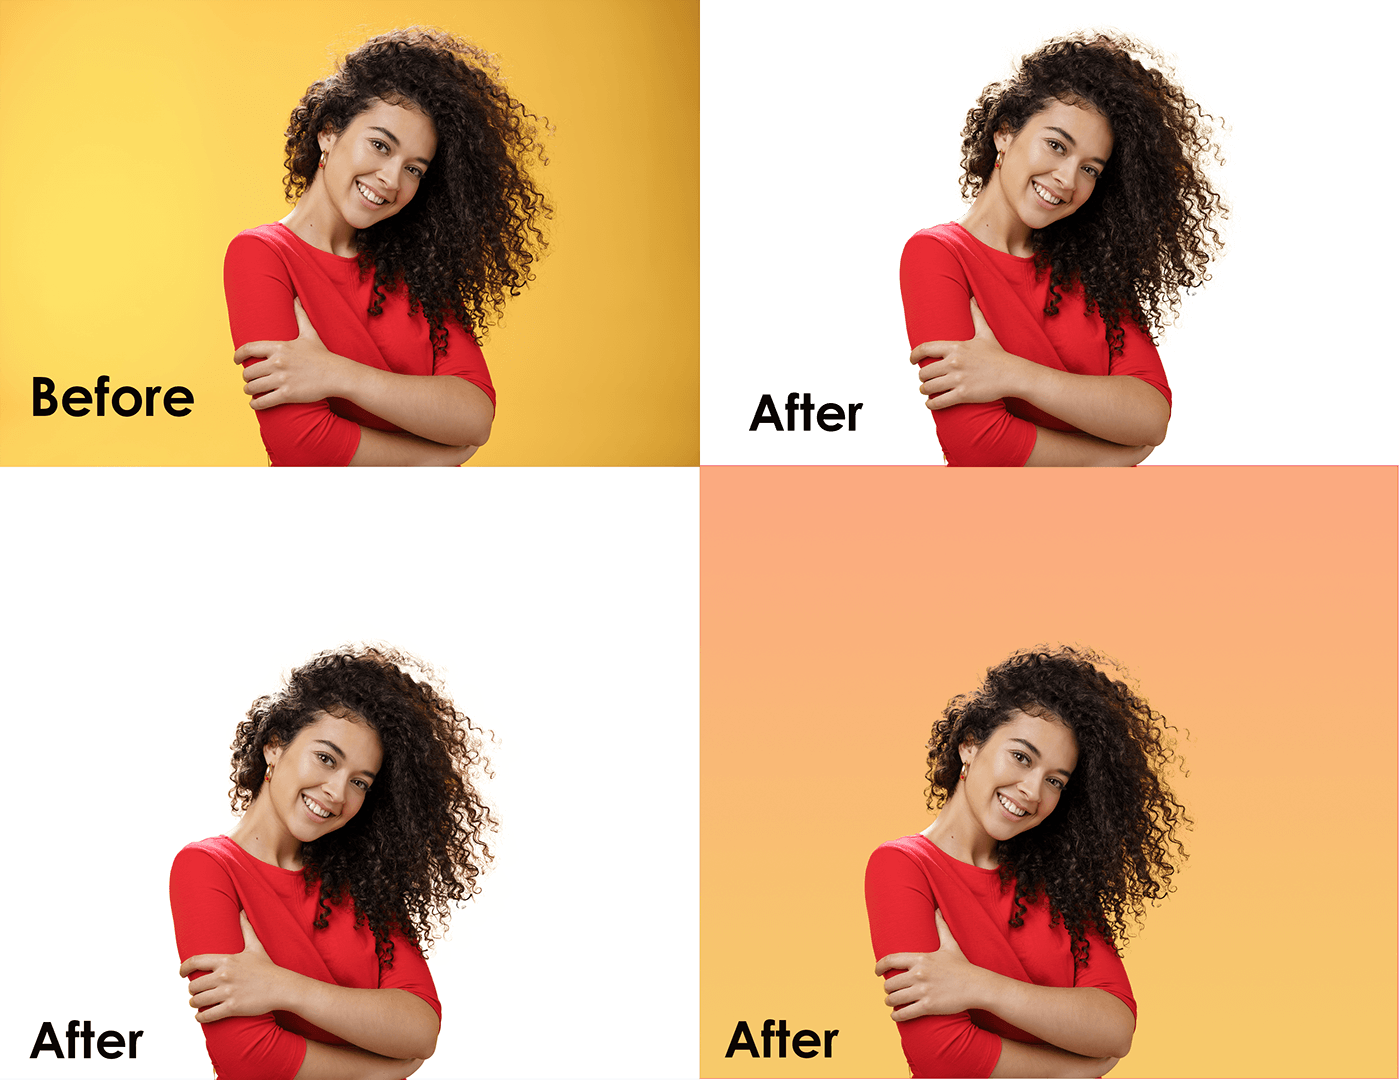 background Background removal Background Remove Clipping path cut out image Image Editing photo editing remove background tranparent white background